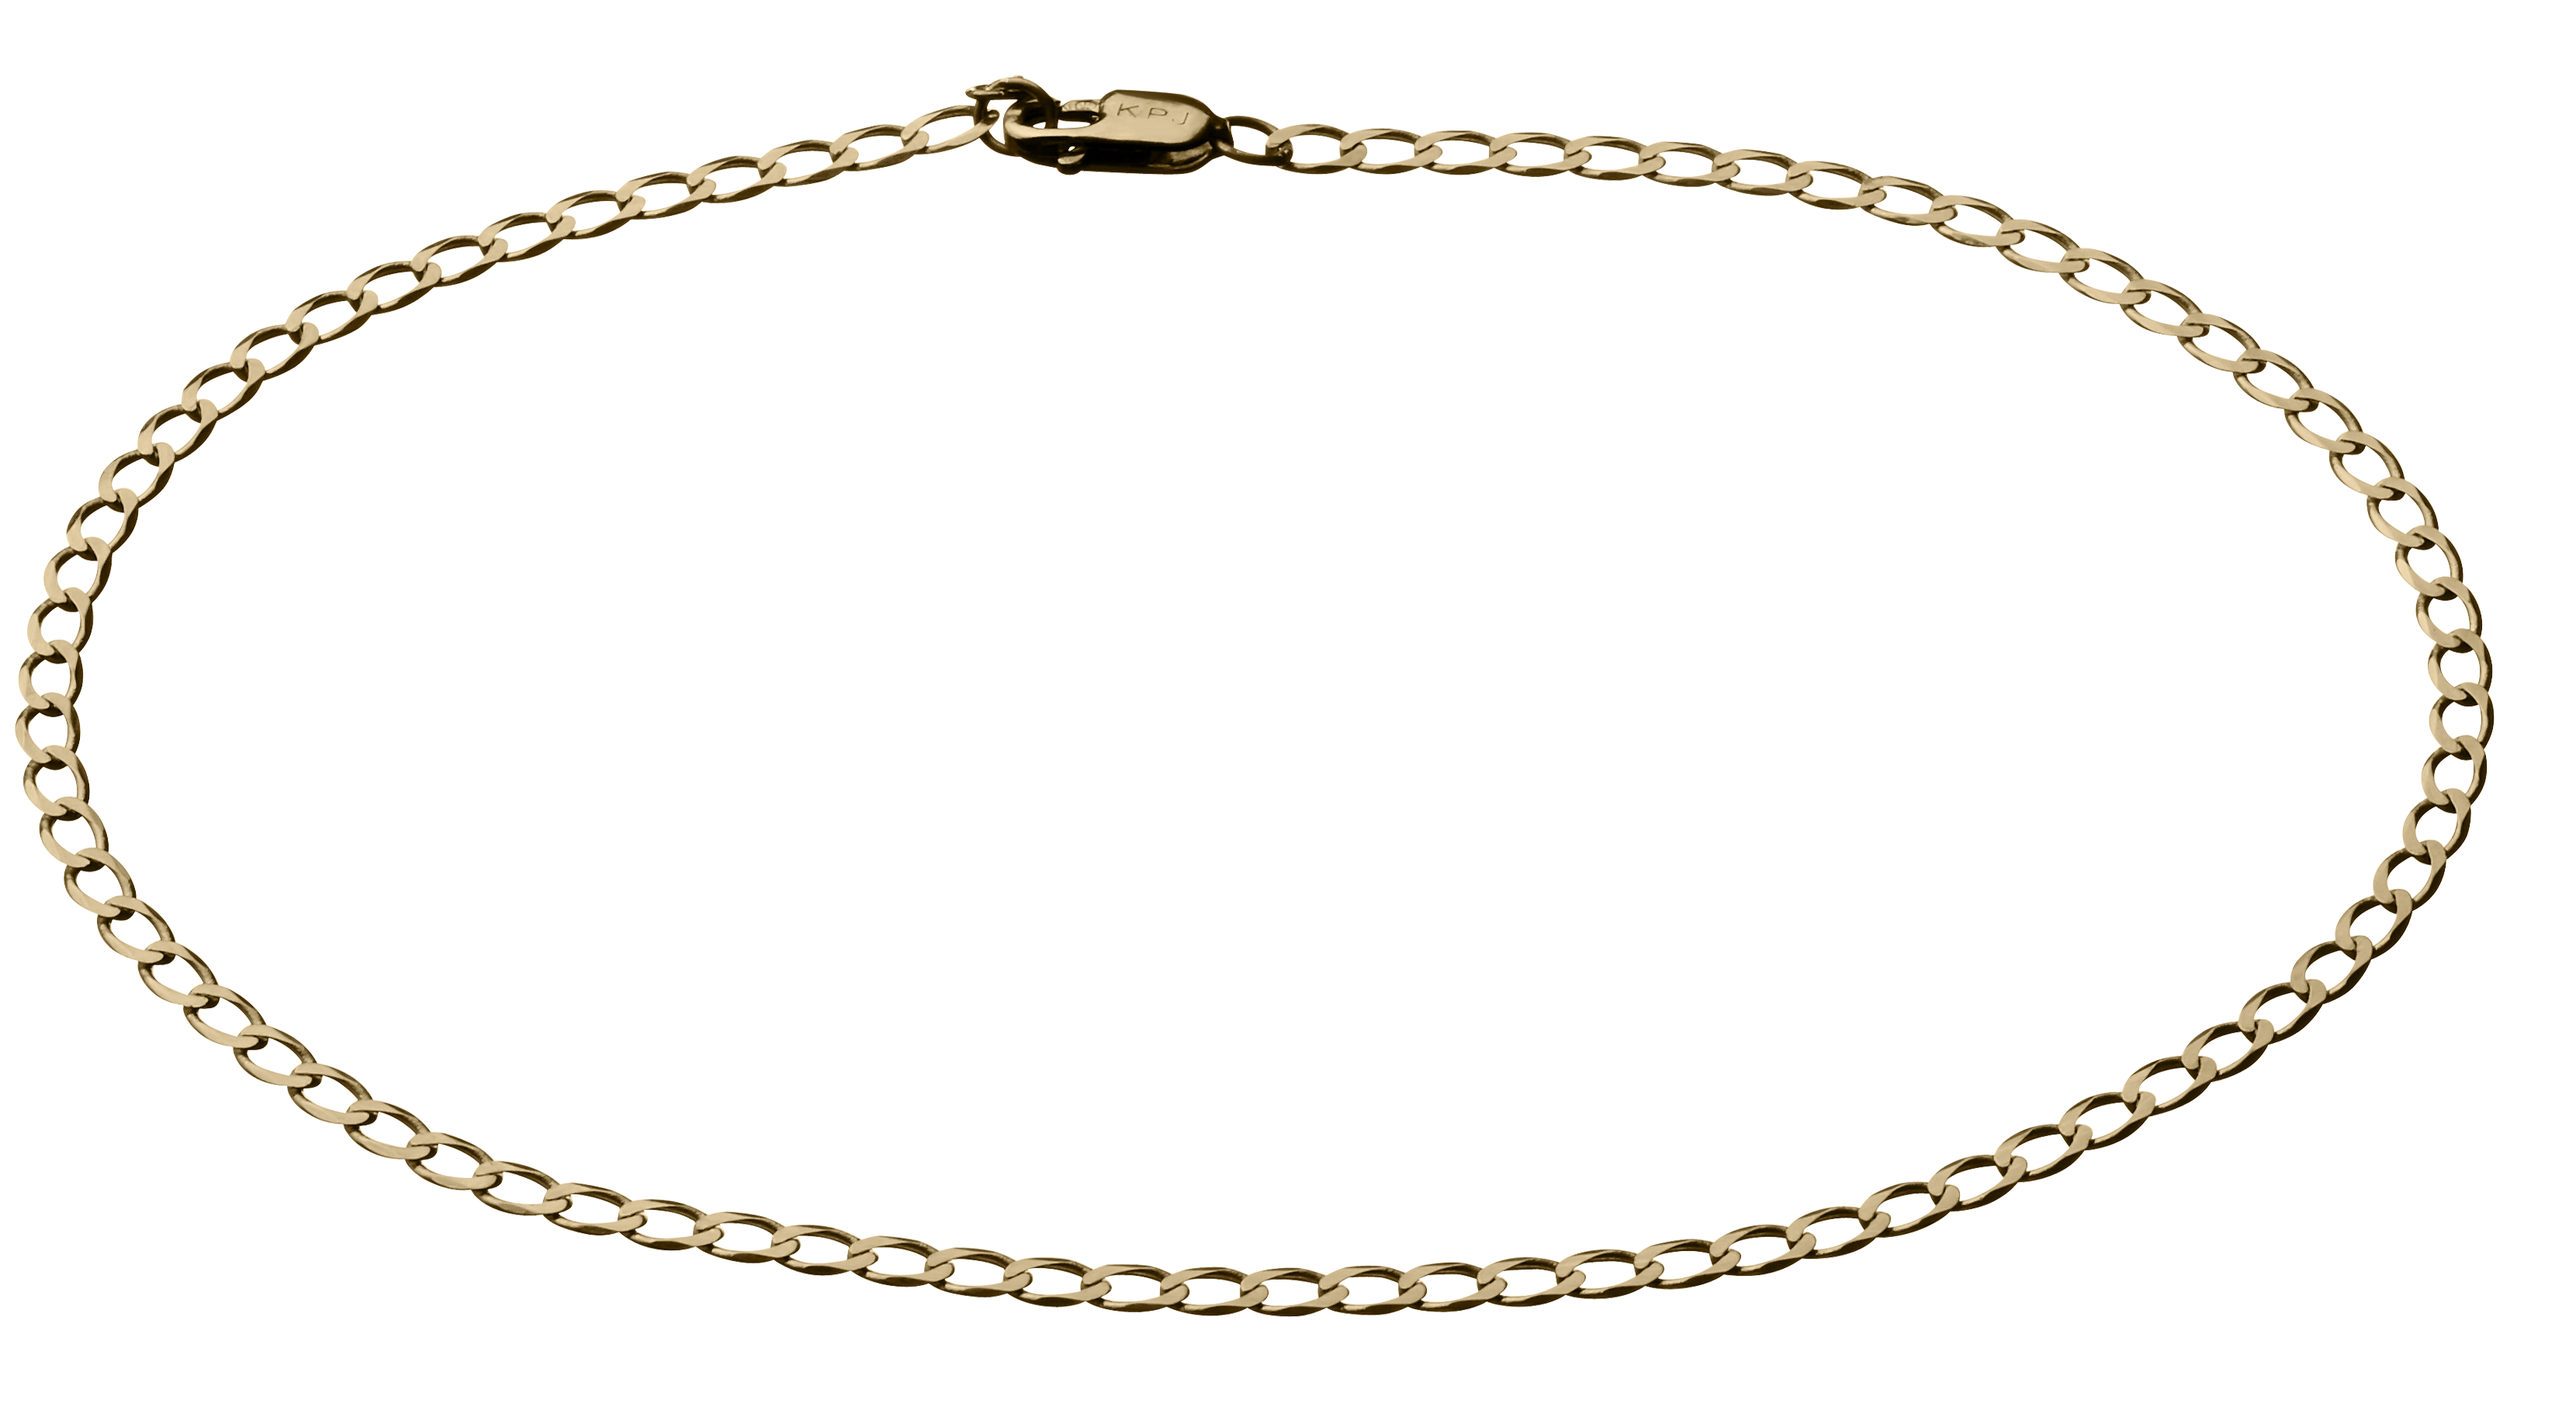 10" Adjustable Anklet, 10kt Yellow Gold.....................NOW